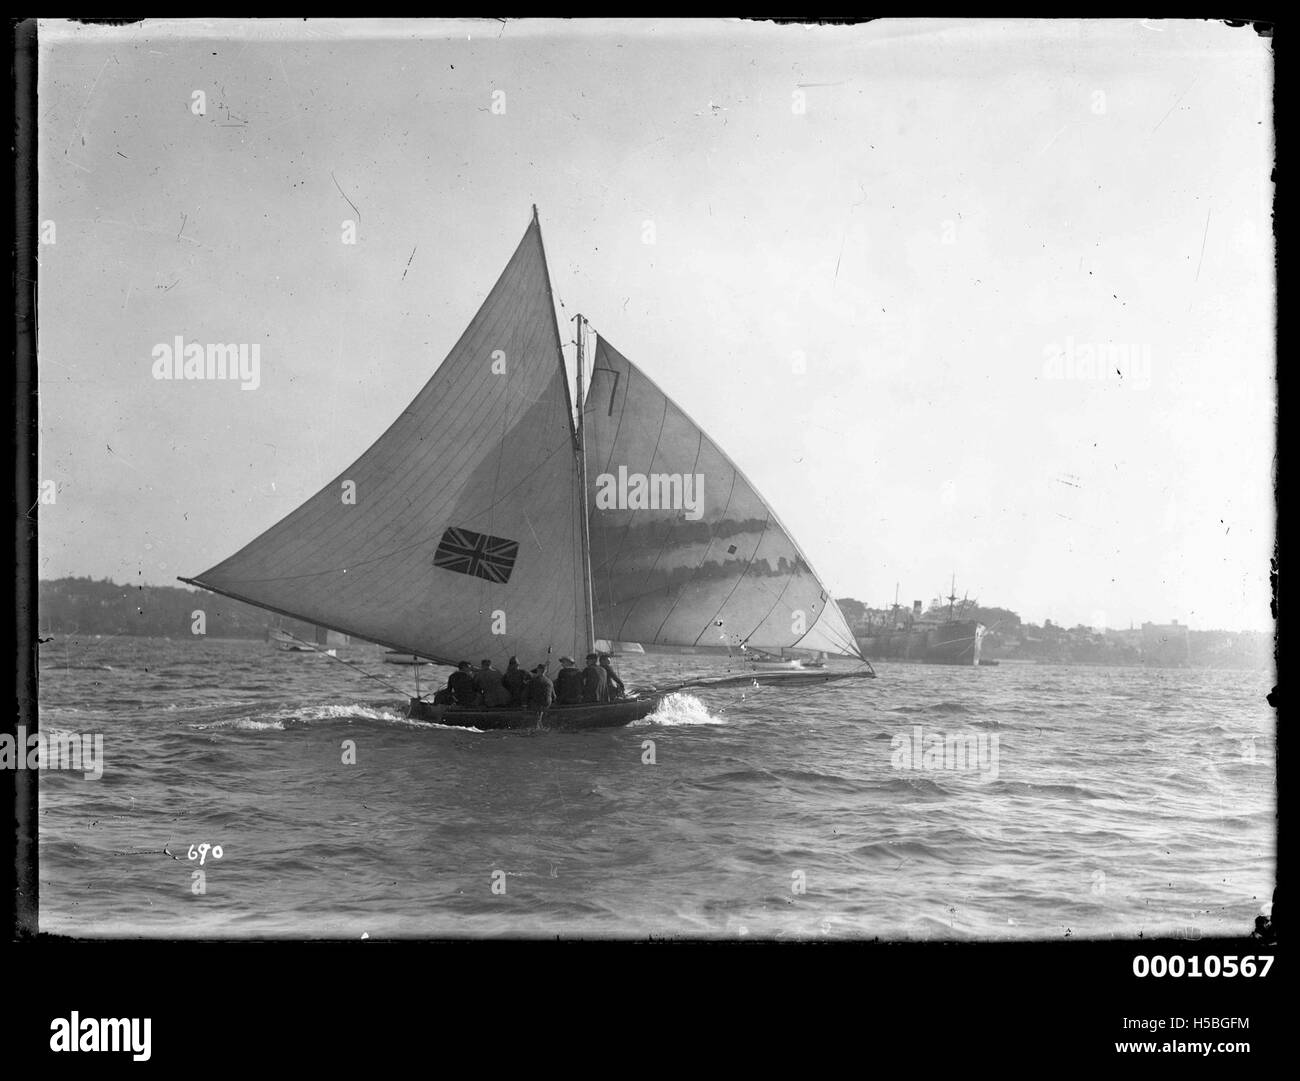 18 footer, possibly AUSTRALIA, under sail on Sydney Harbour Stock Photo